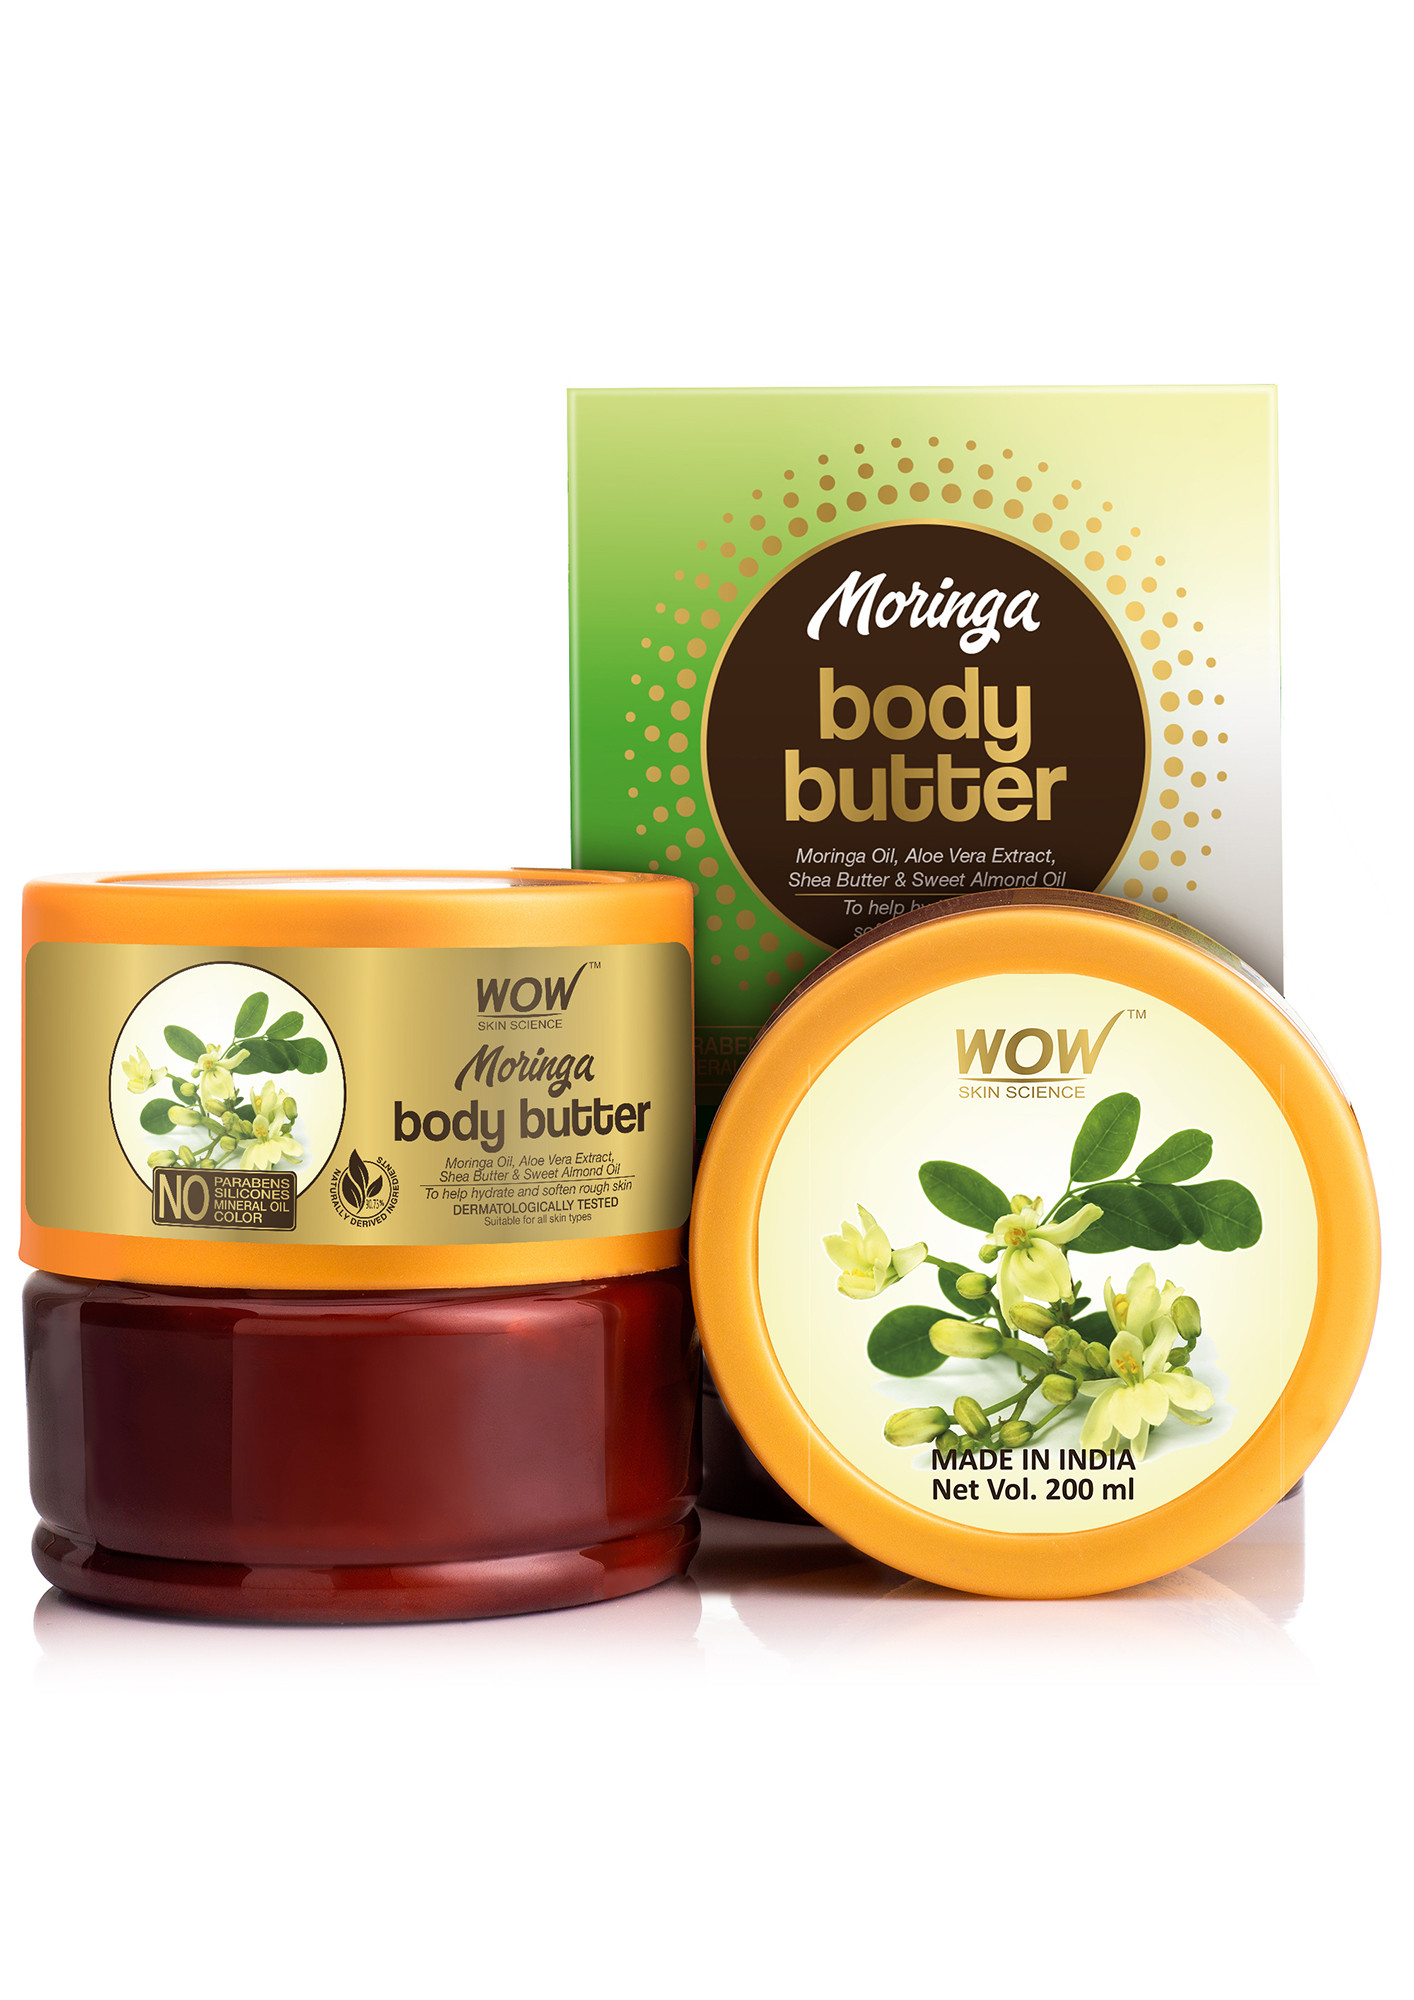 WOW Skin Science Moringa Body Butter - No Parabens, Silicones, Mineral Oil & Color - 200mL